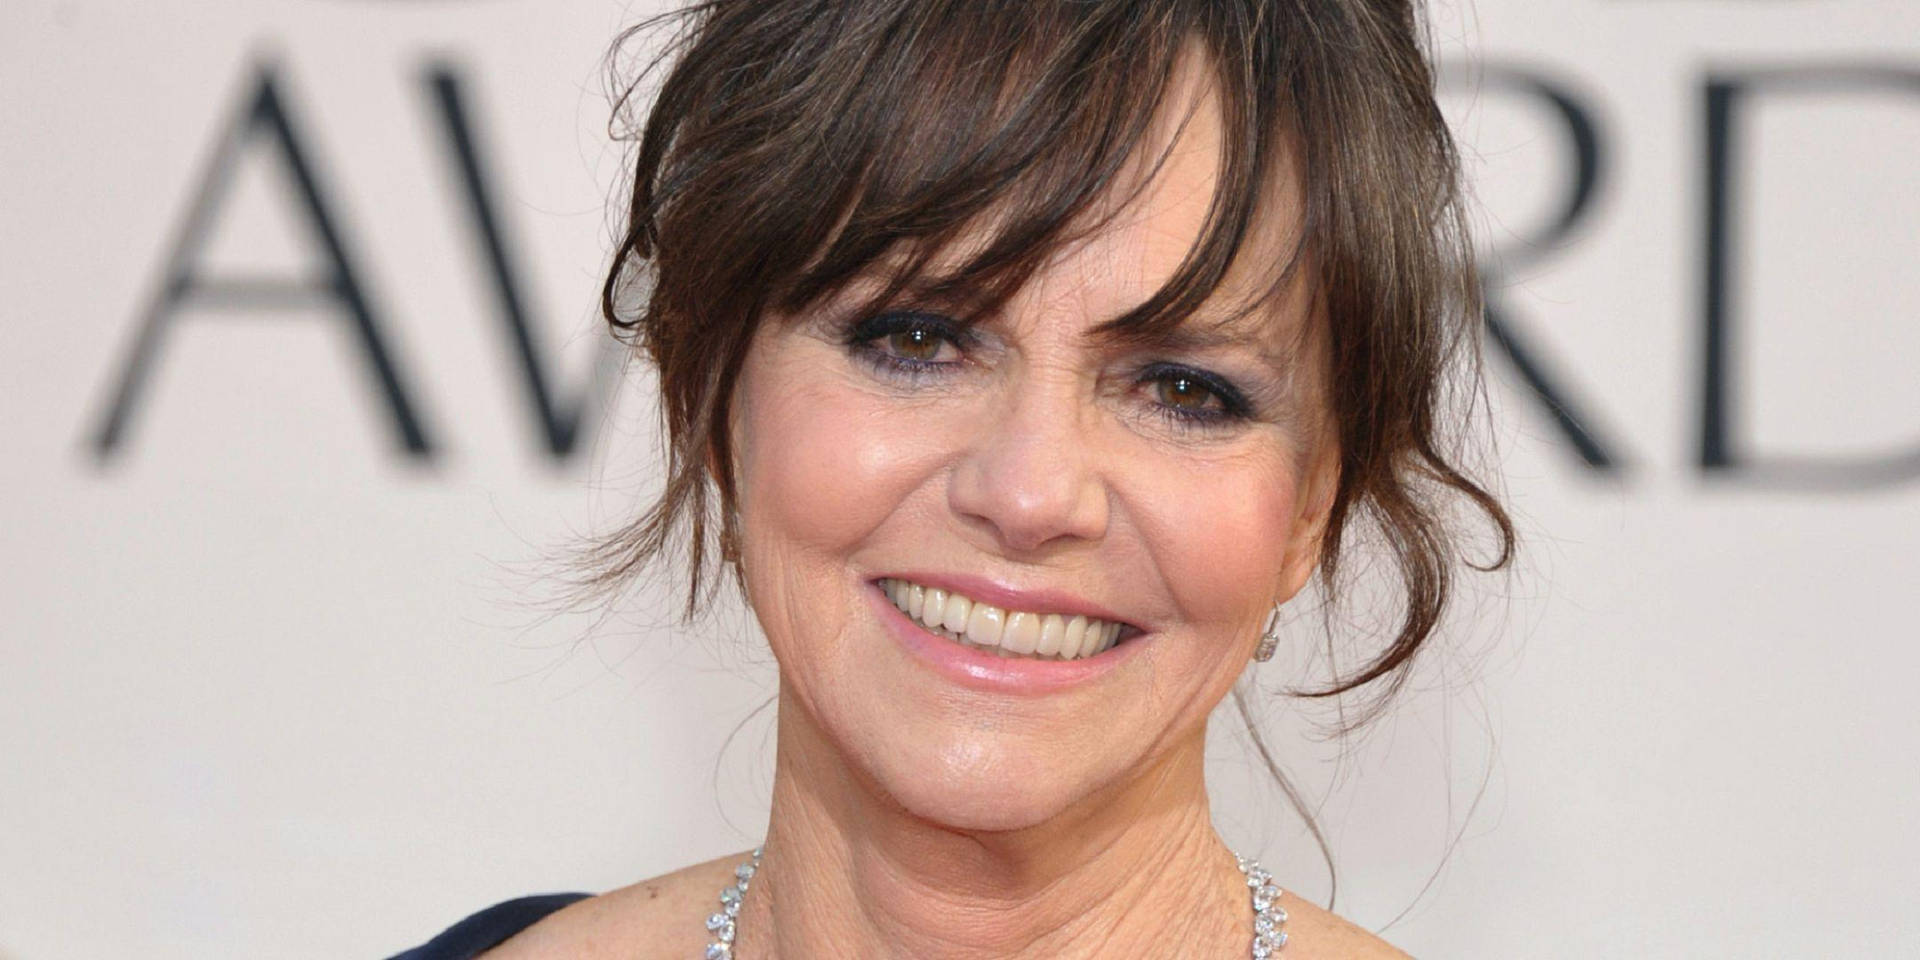 Headshot Of Sally Field At The Golden Globes Awards 2013 Background